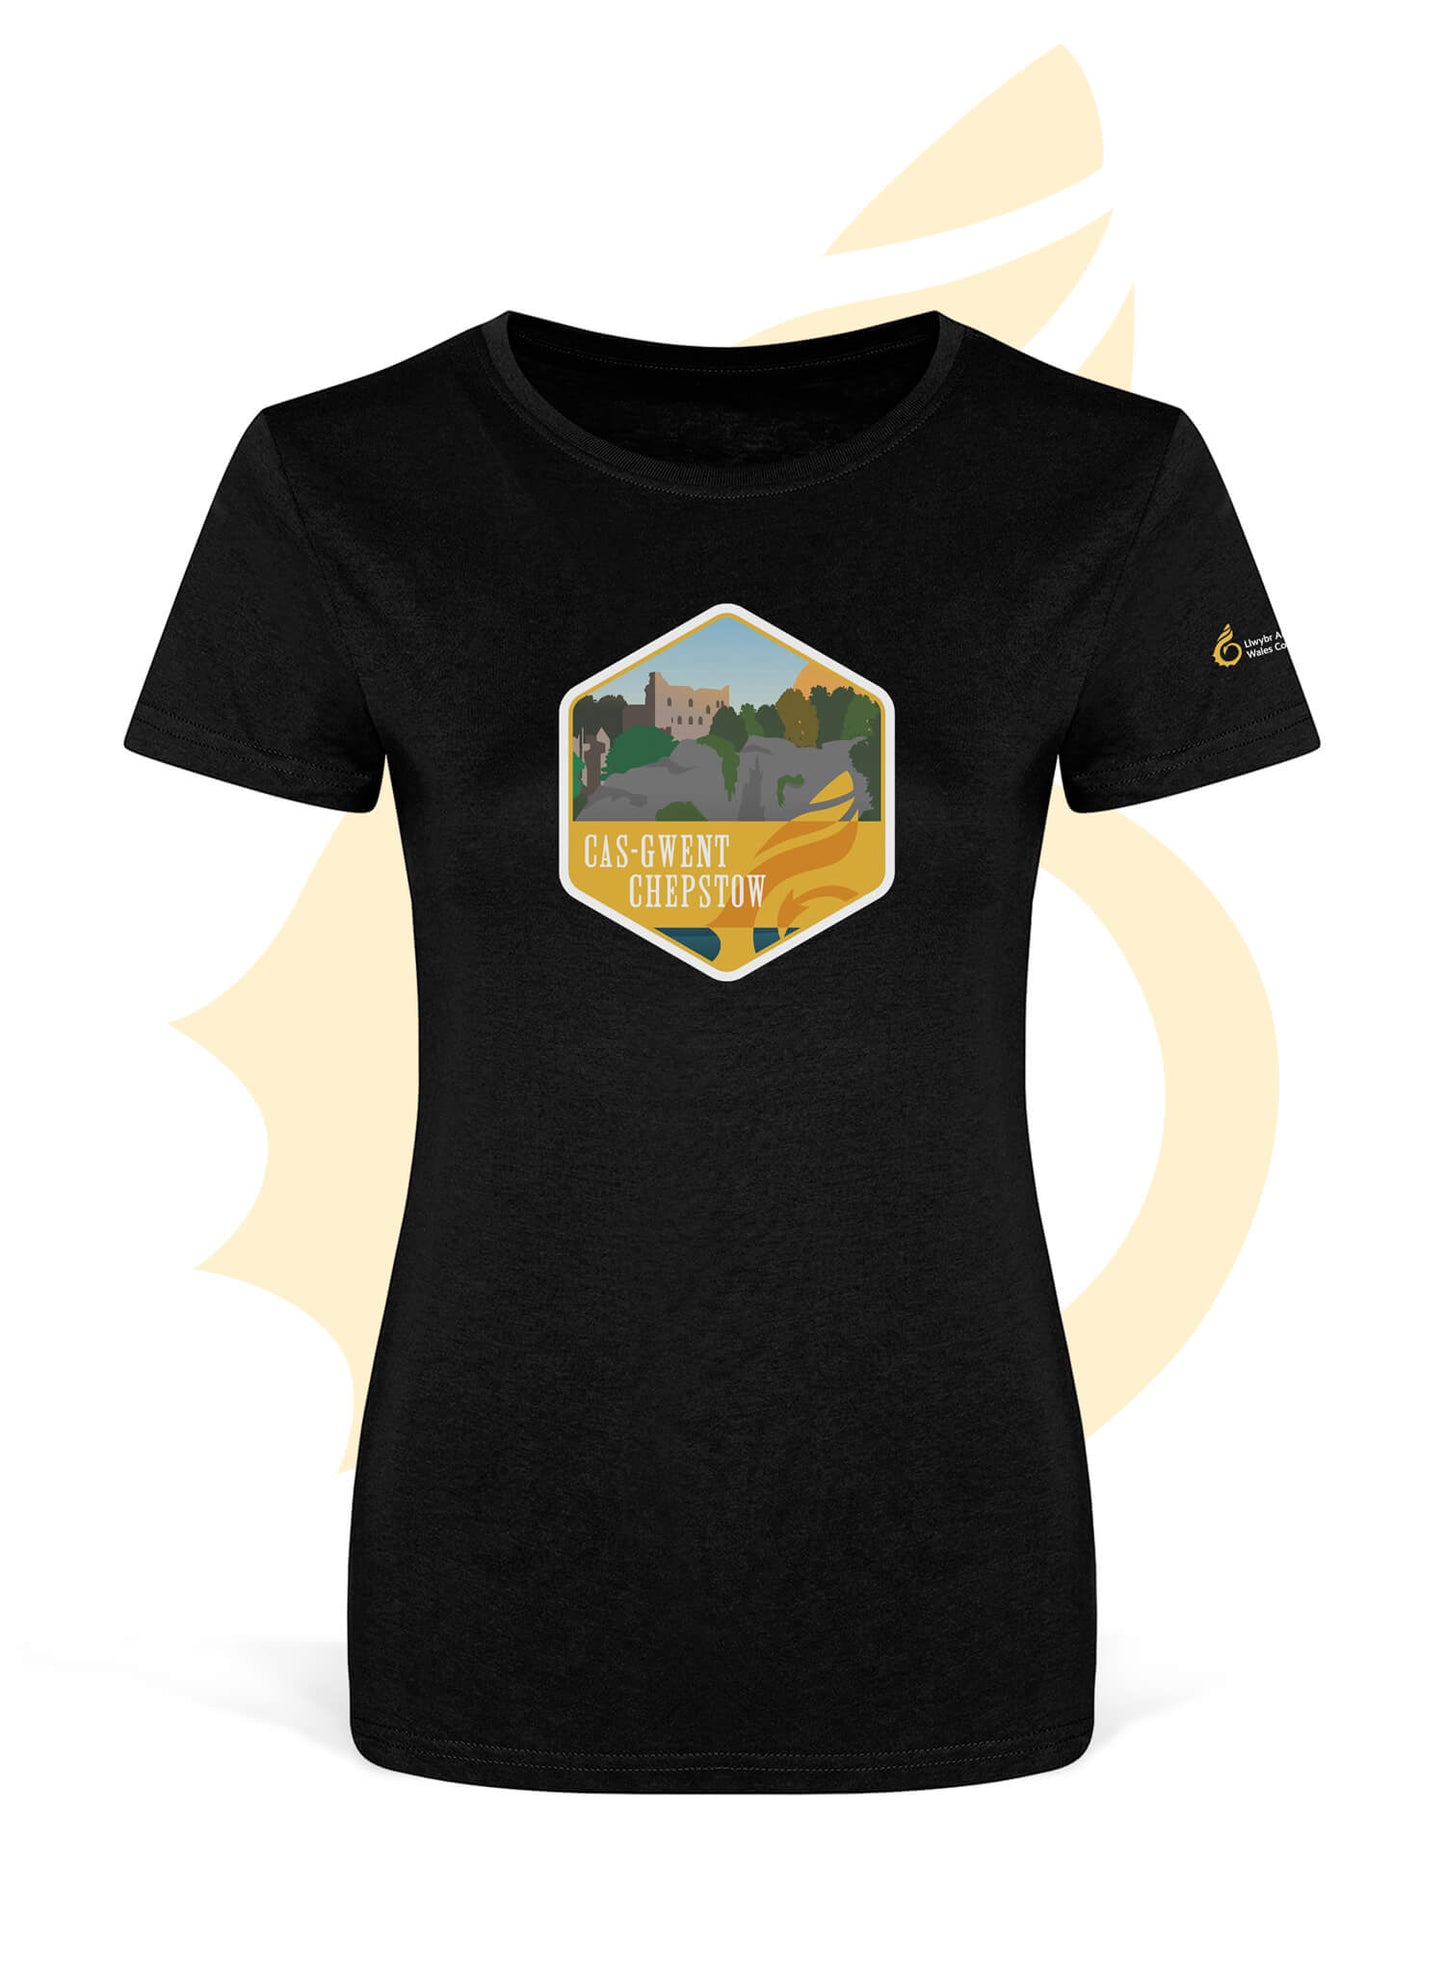 Black womens fitted t-shirt with Wales Coast Path Chepstow design.